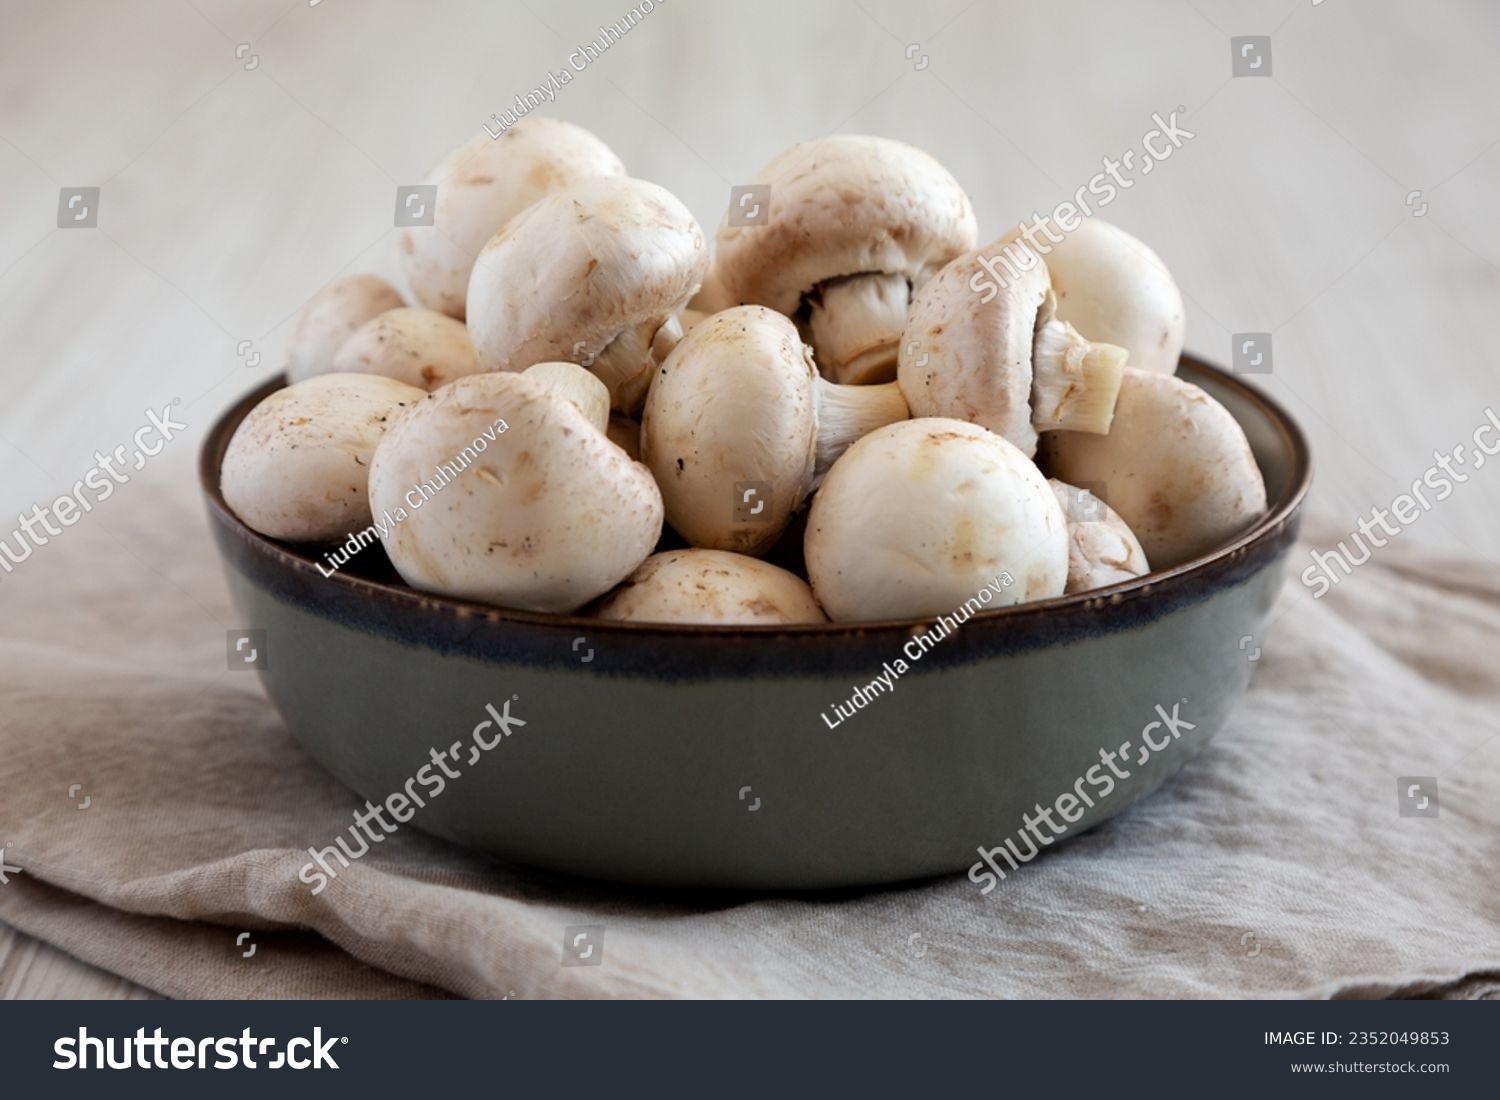 Raw White Champignon Mushrooms in a Bowl on a white wooden background, side view. Close-up. #2352049853